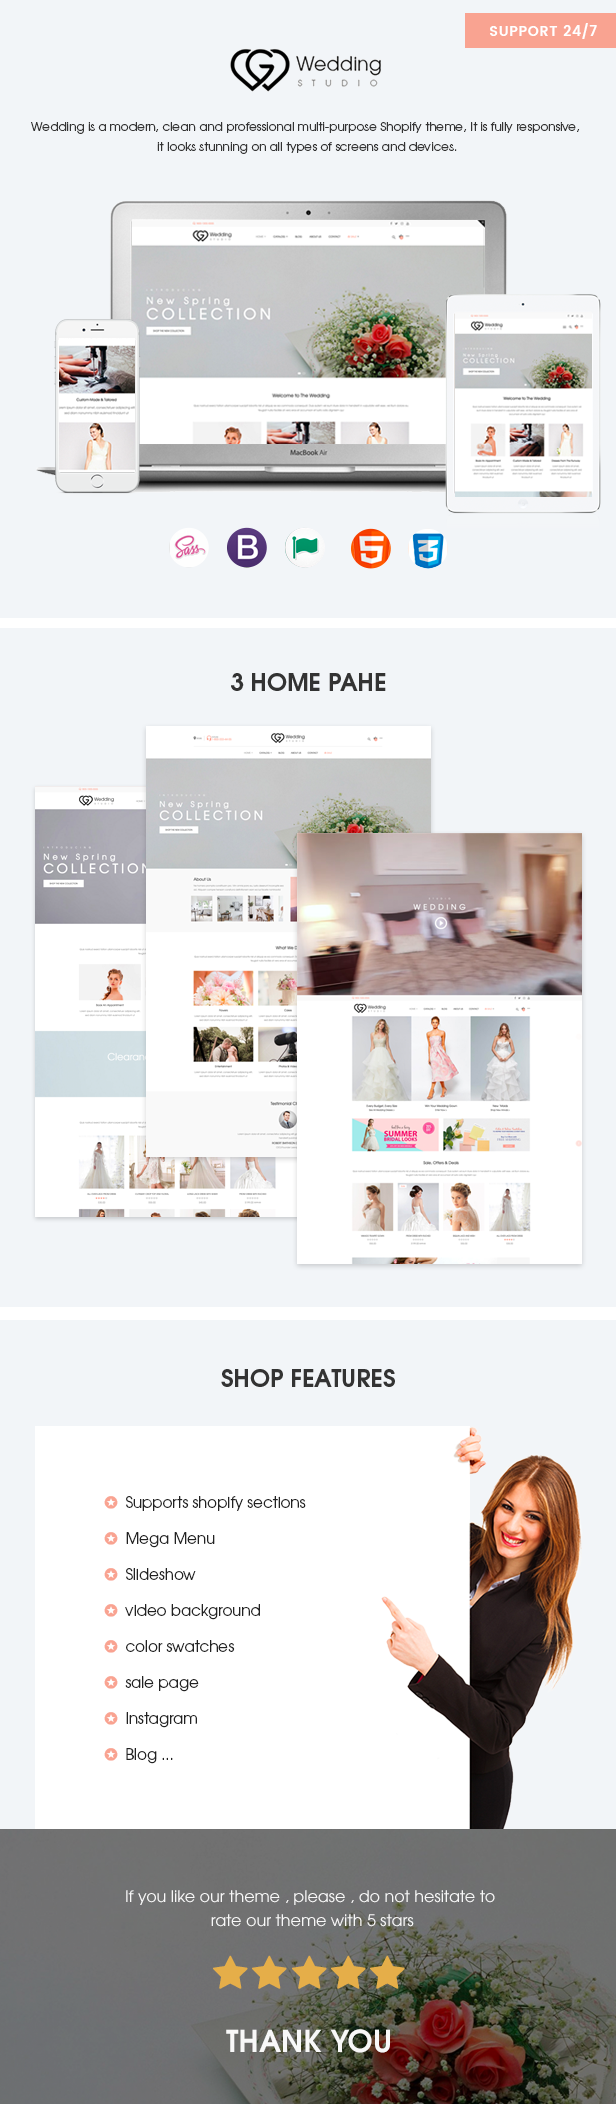 Wedding – Responsive Shopify theme FULL FEATURE List